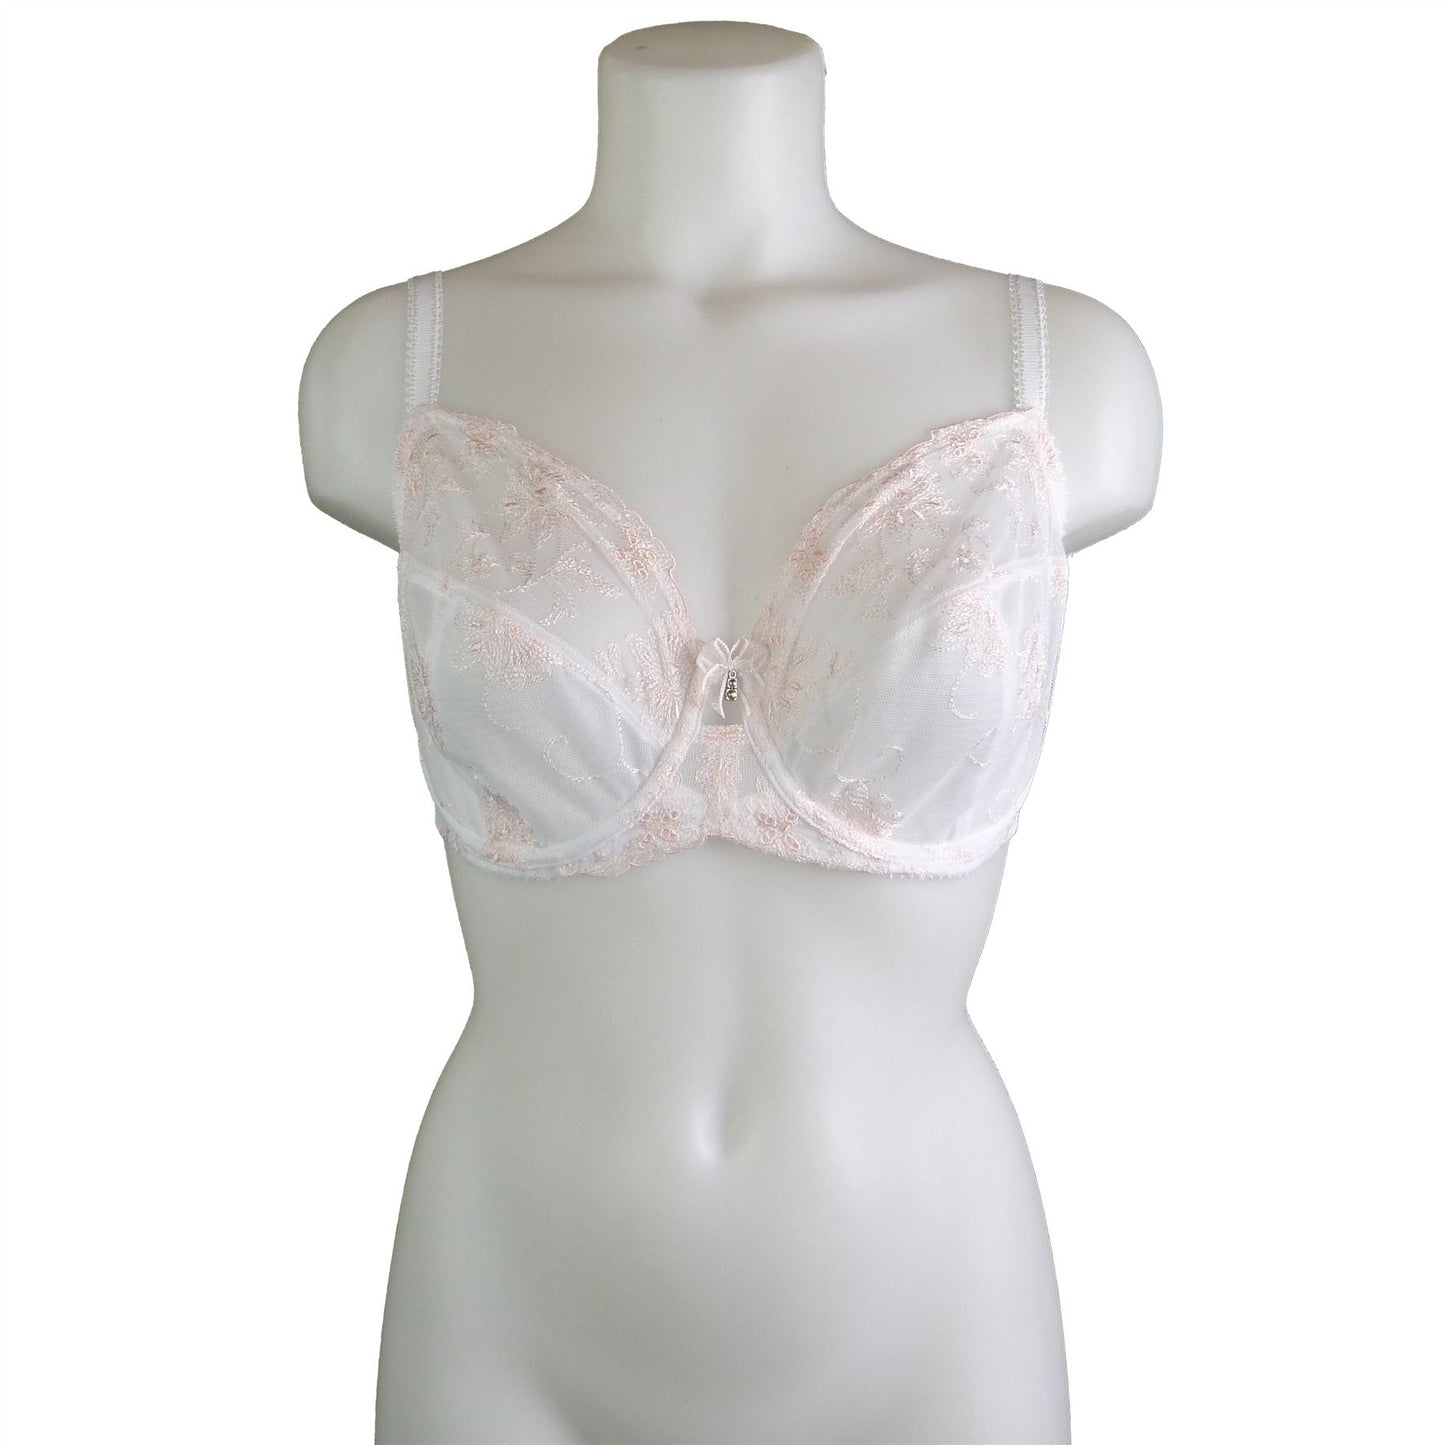 32C Bra Full Cup Charnos Grace Underwired Lightly Padded Lace Overlay Brand New